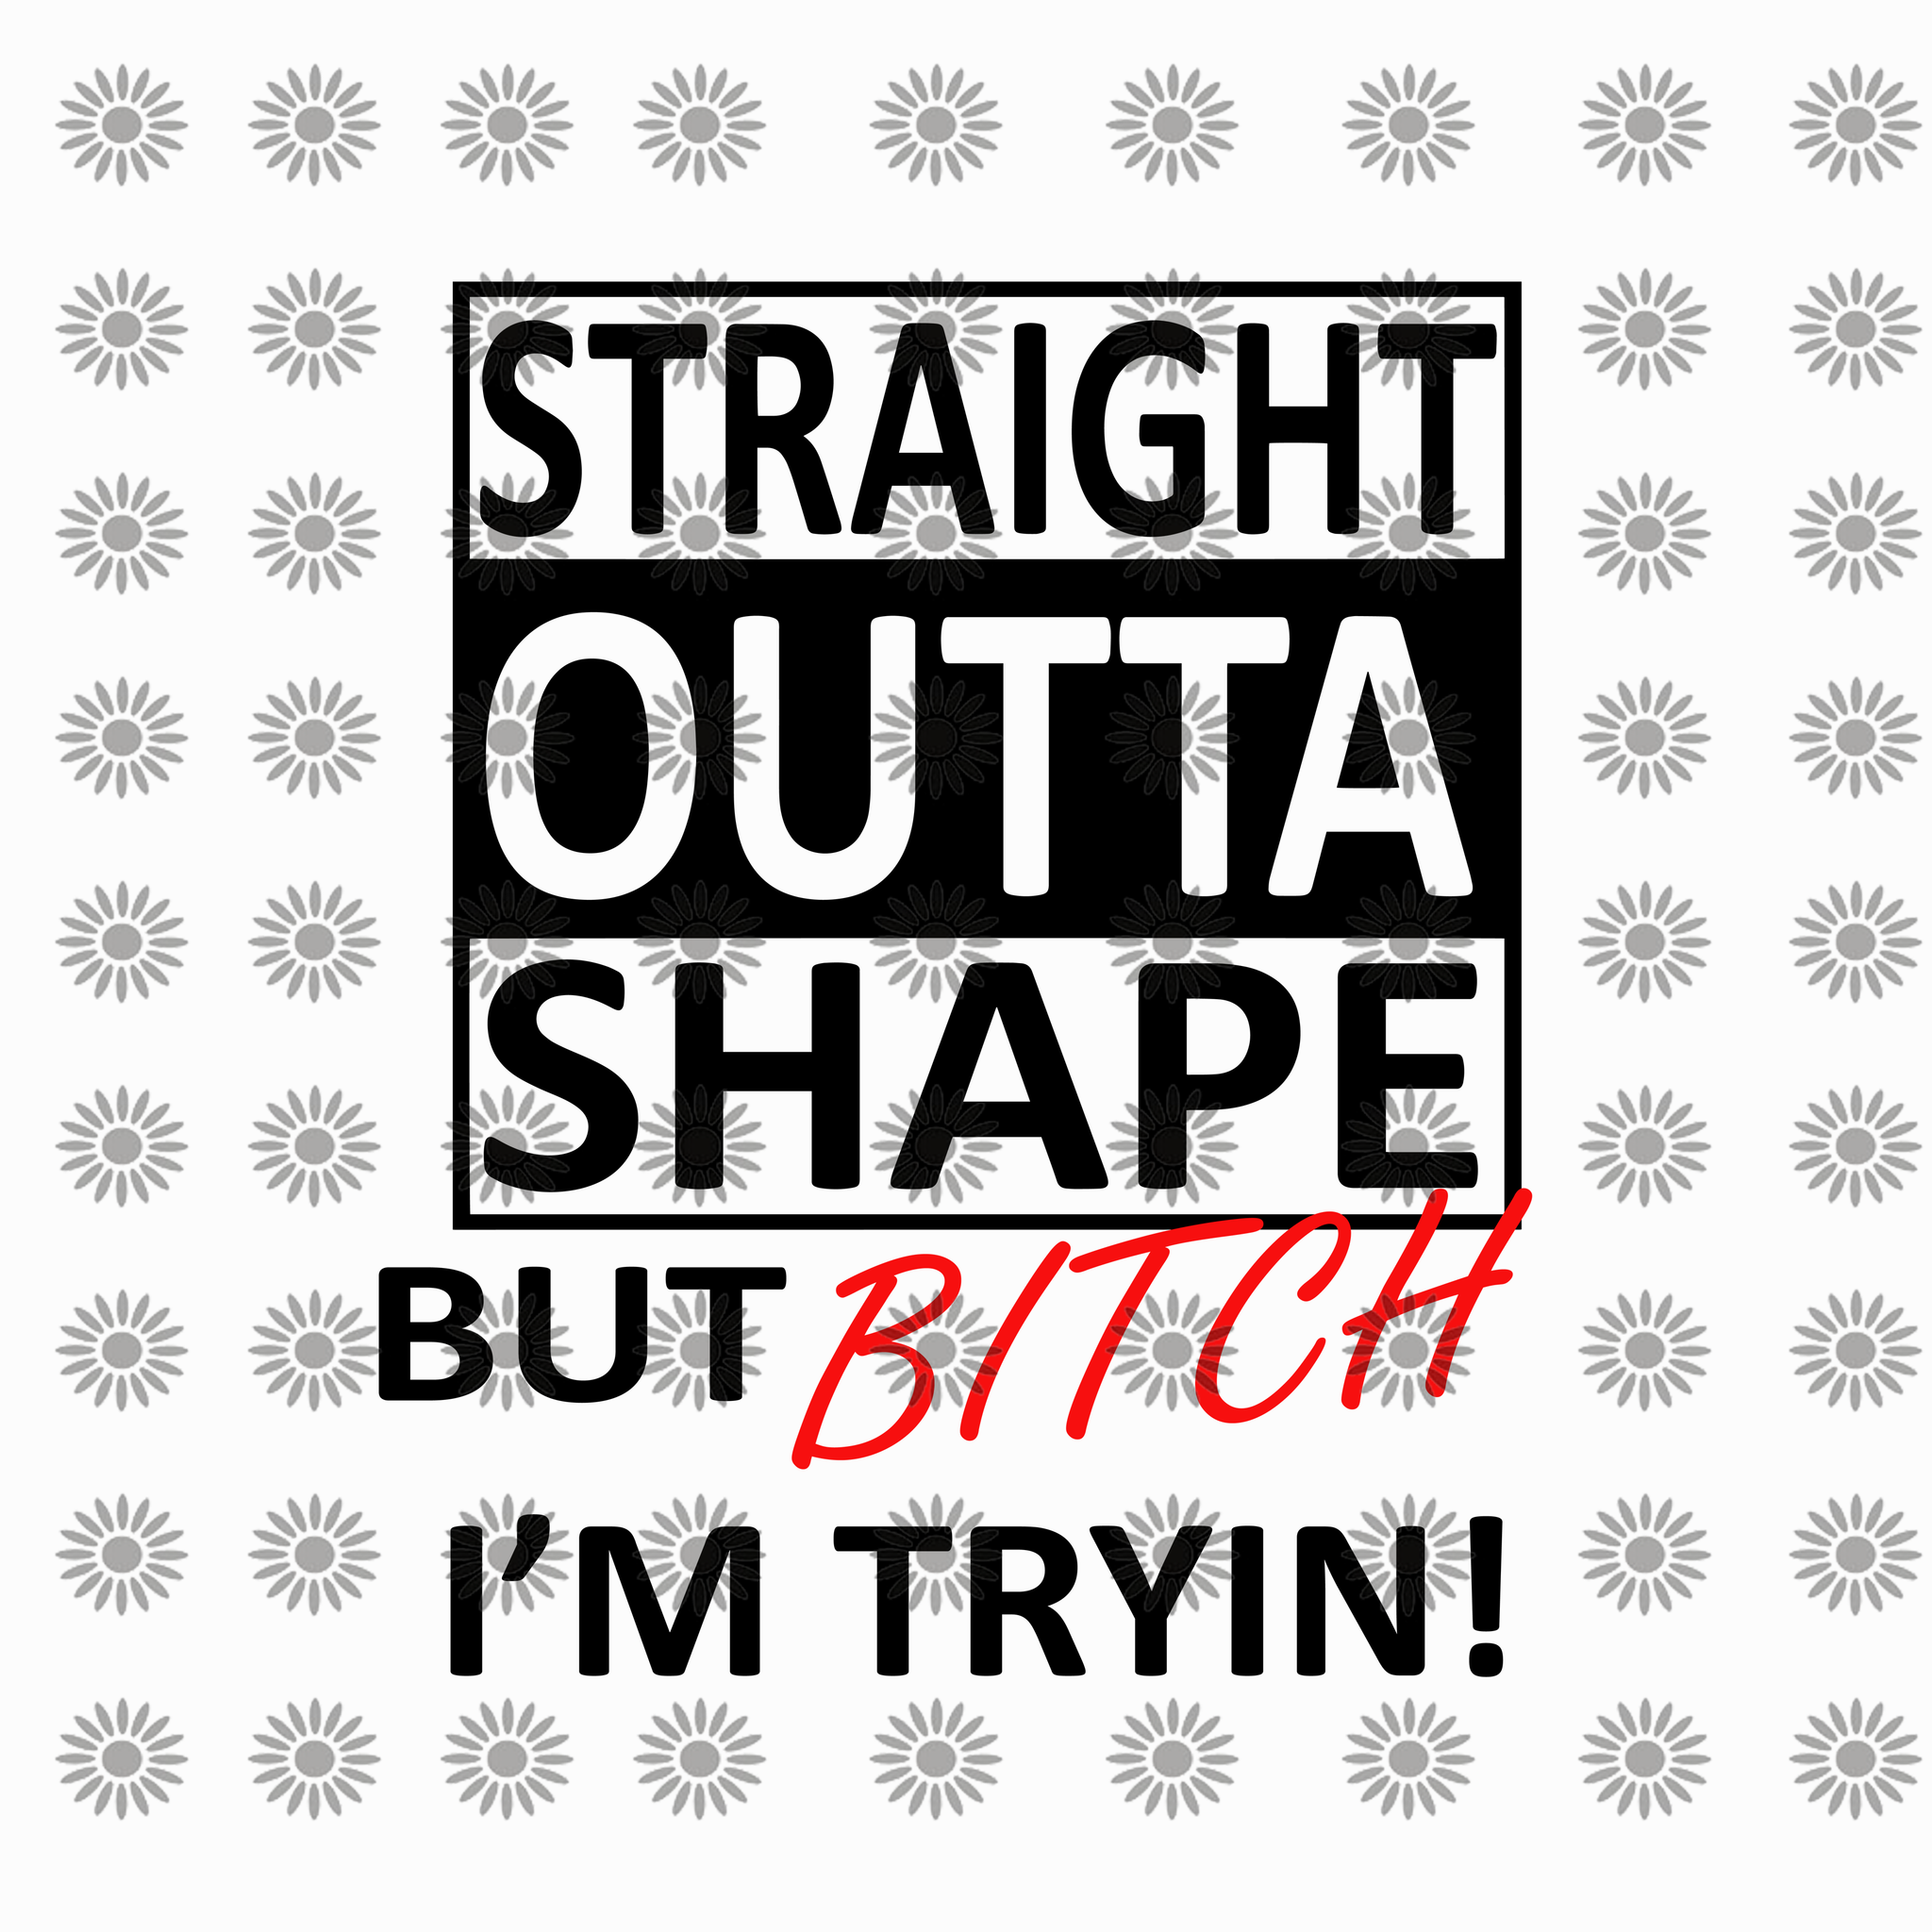 Straight outta shape but bitch I'm tryin svg, Straight outta shape but bitch I'm tryin, Straight outta shape but bitch I'm tryin png, Bitch svg, Bitch png, funny quotes svg, eps, dxf, png file